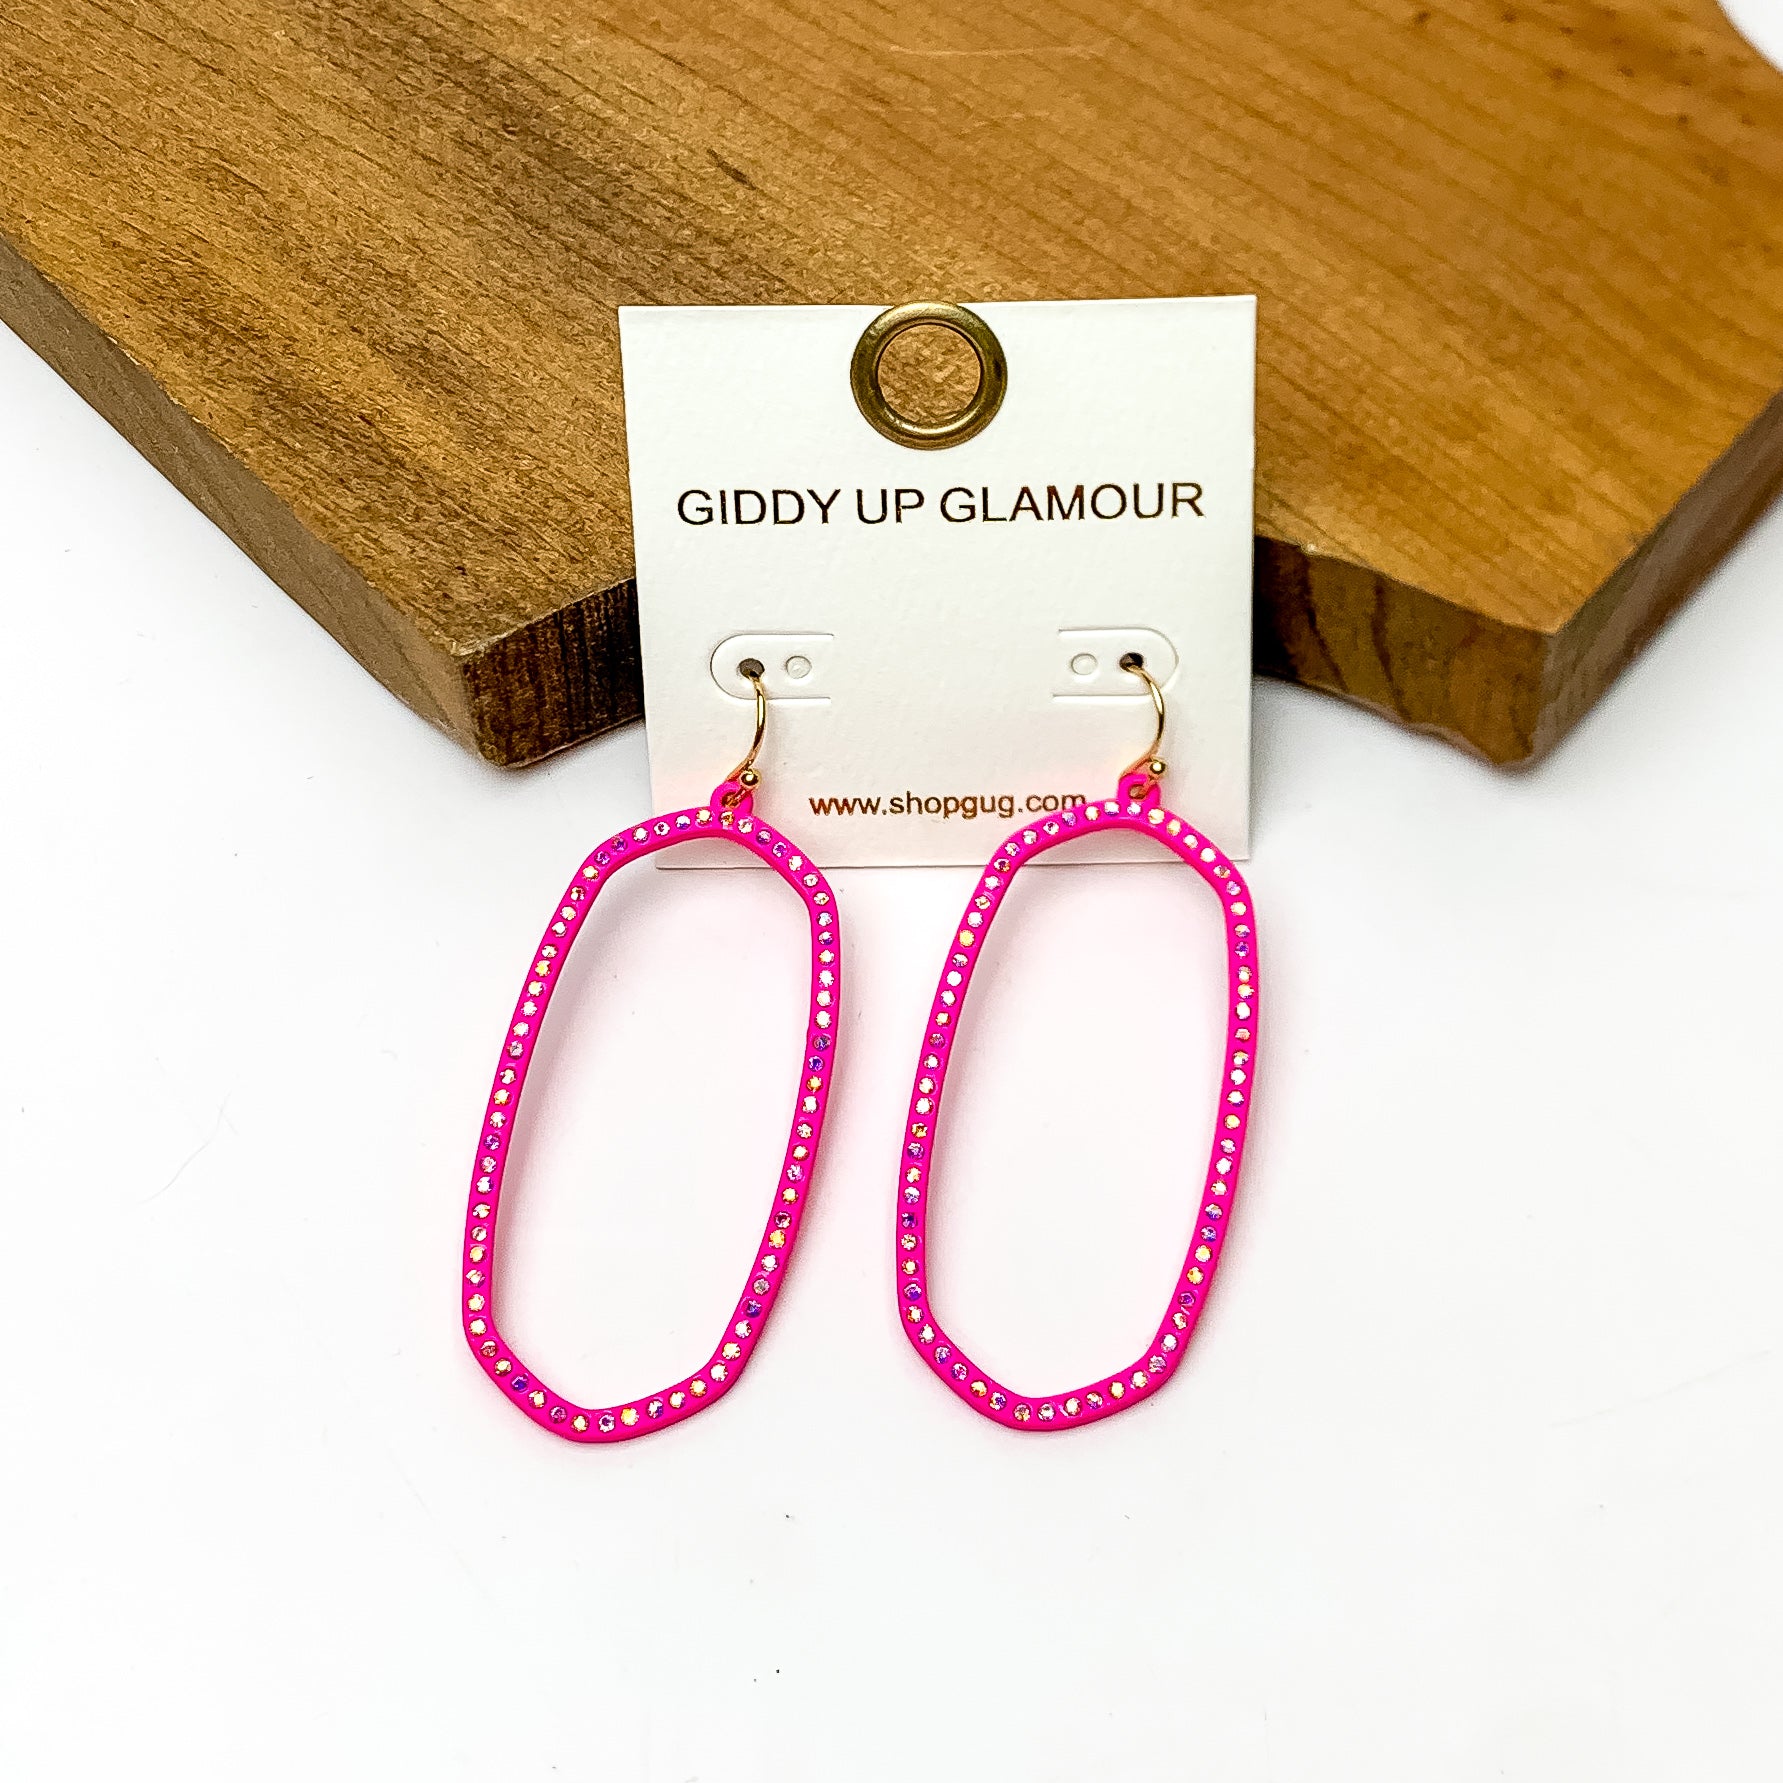 Sparkle Girl Open Oval Earrings in Hot Pink. These earrings are pictured laying against a wood piece with a white background.